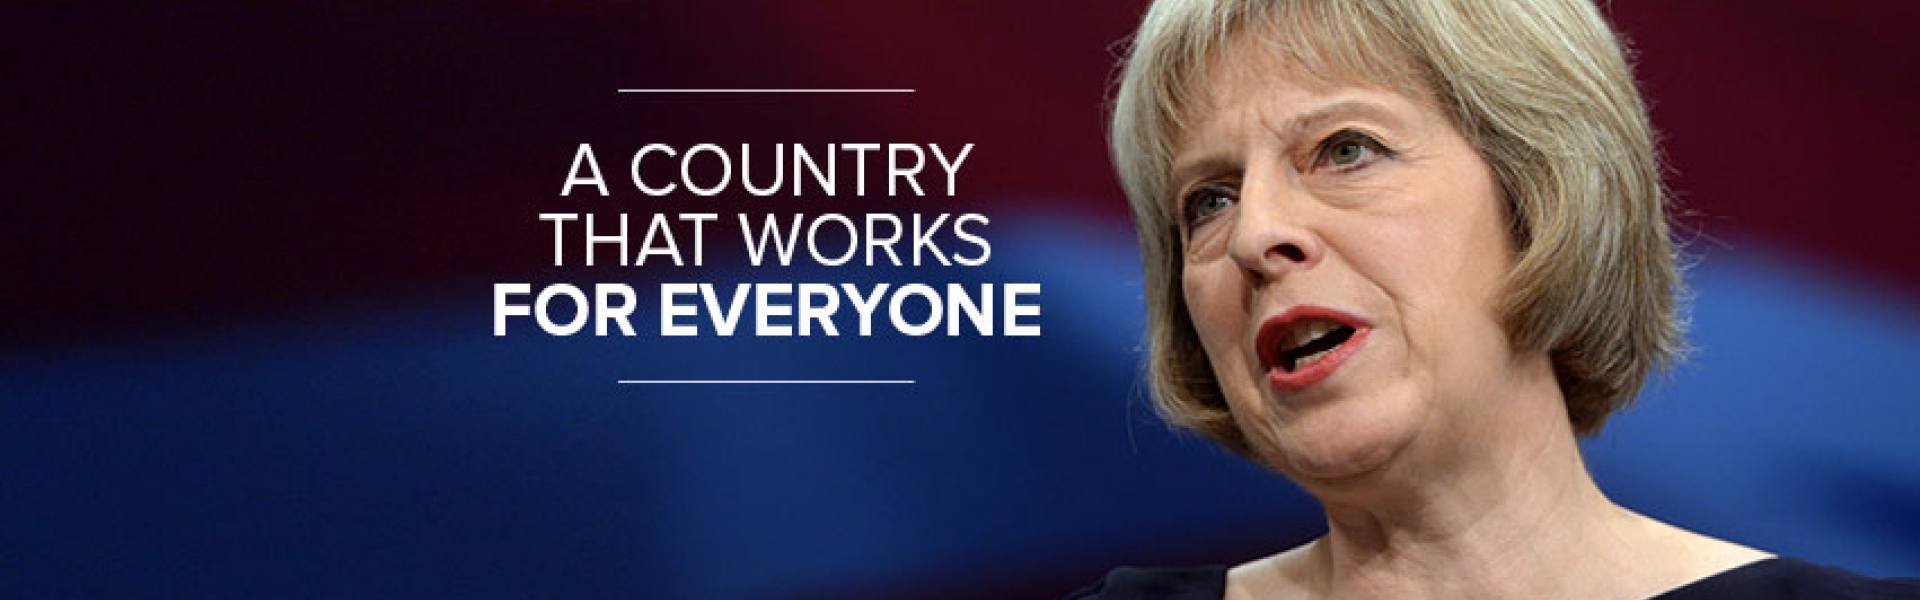 A Country that Works for Everyone